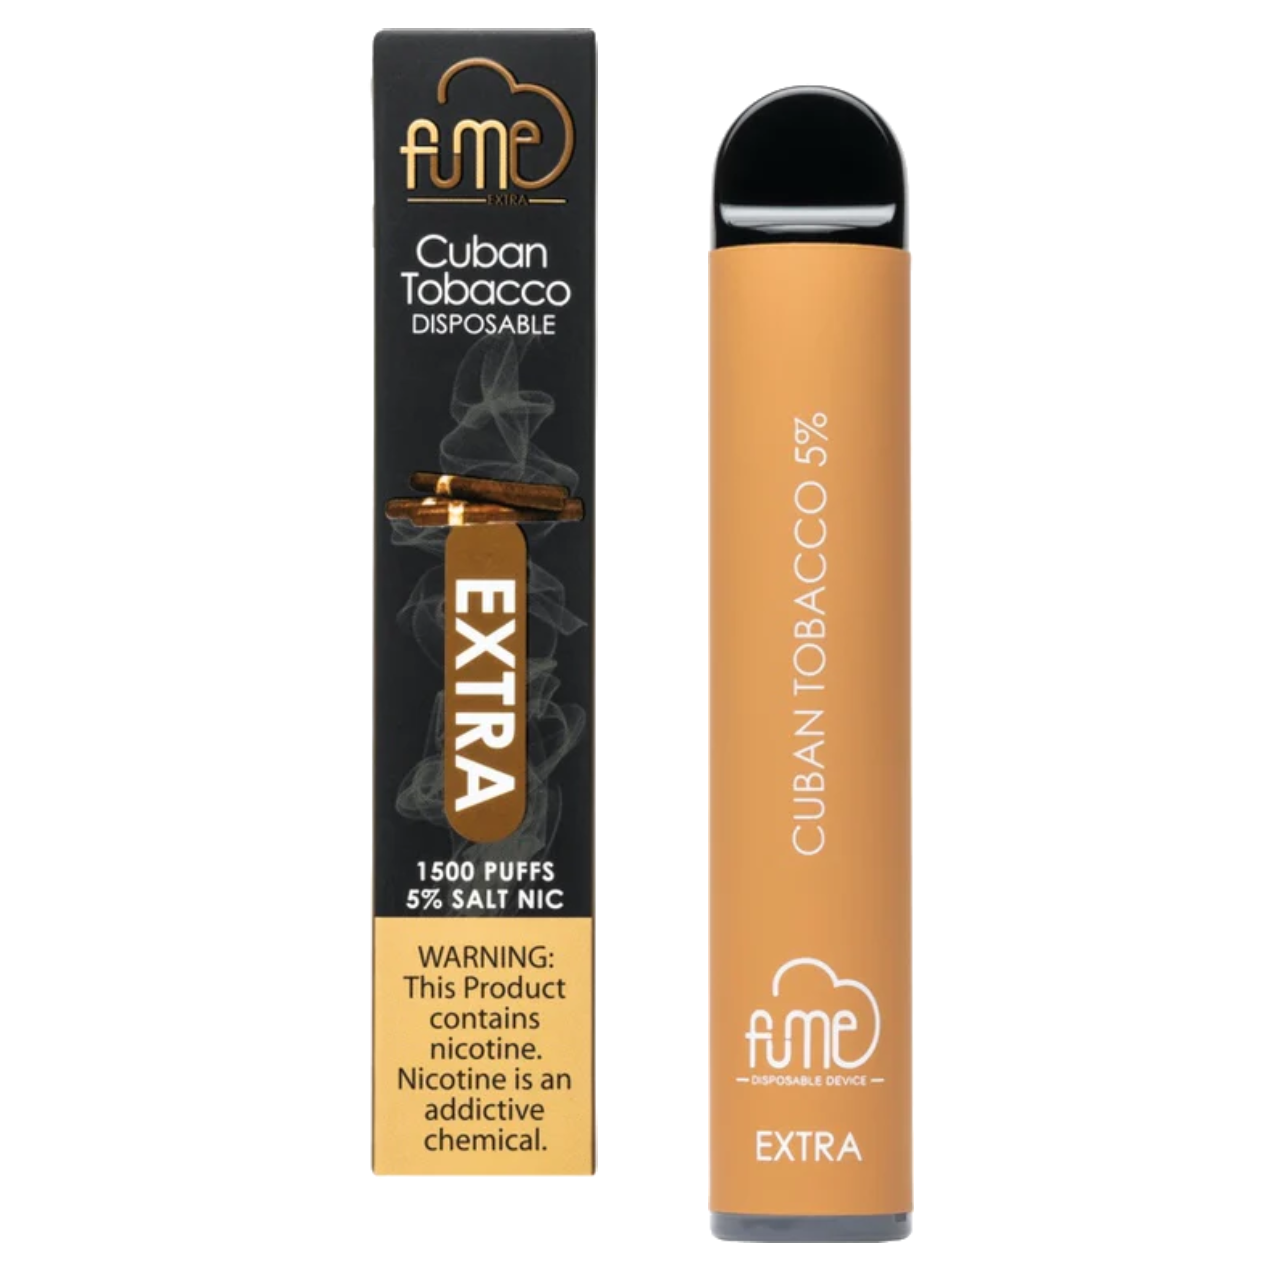 Fume Extra Disposable 1500 Puffs - Cuban Tobacco